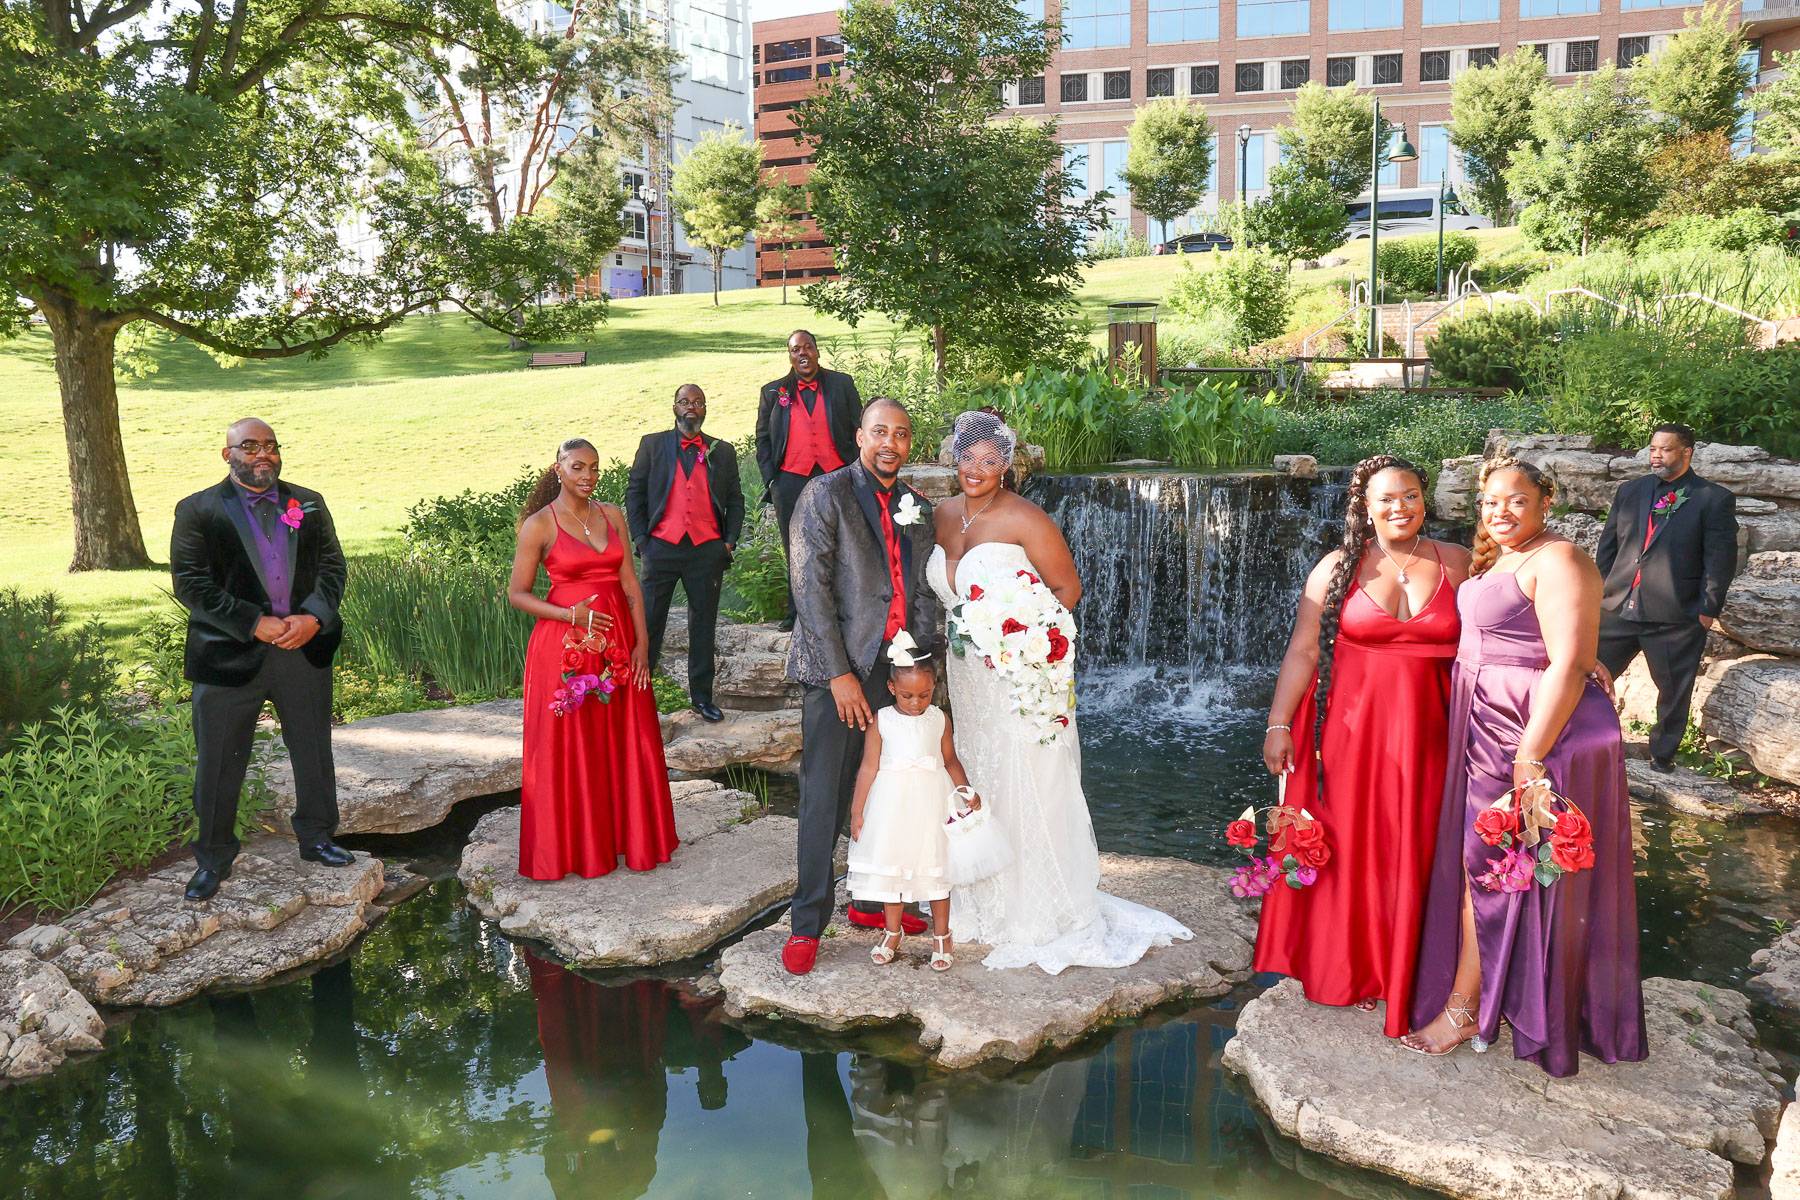 The newlyweds and their attendants at a pond and waterfall